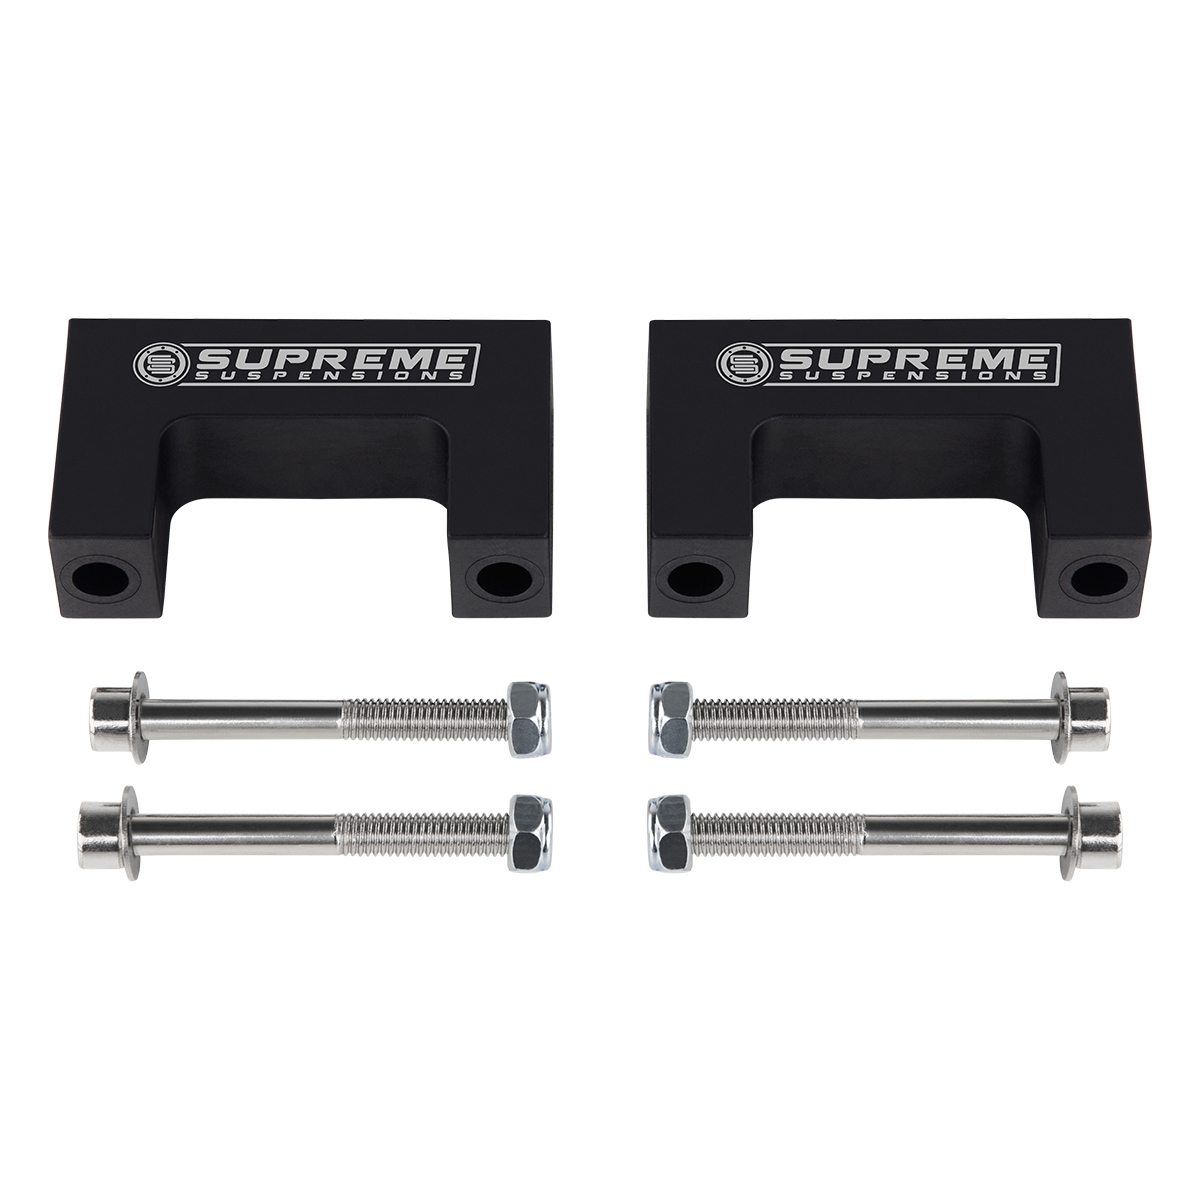 For Ford Excursion Expedition Explorer BowTie Shock Mount Extenders for 2 Inch Lifts